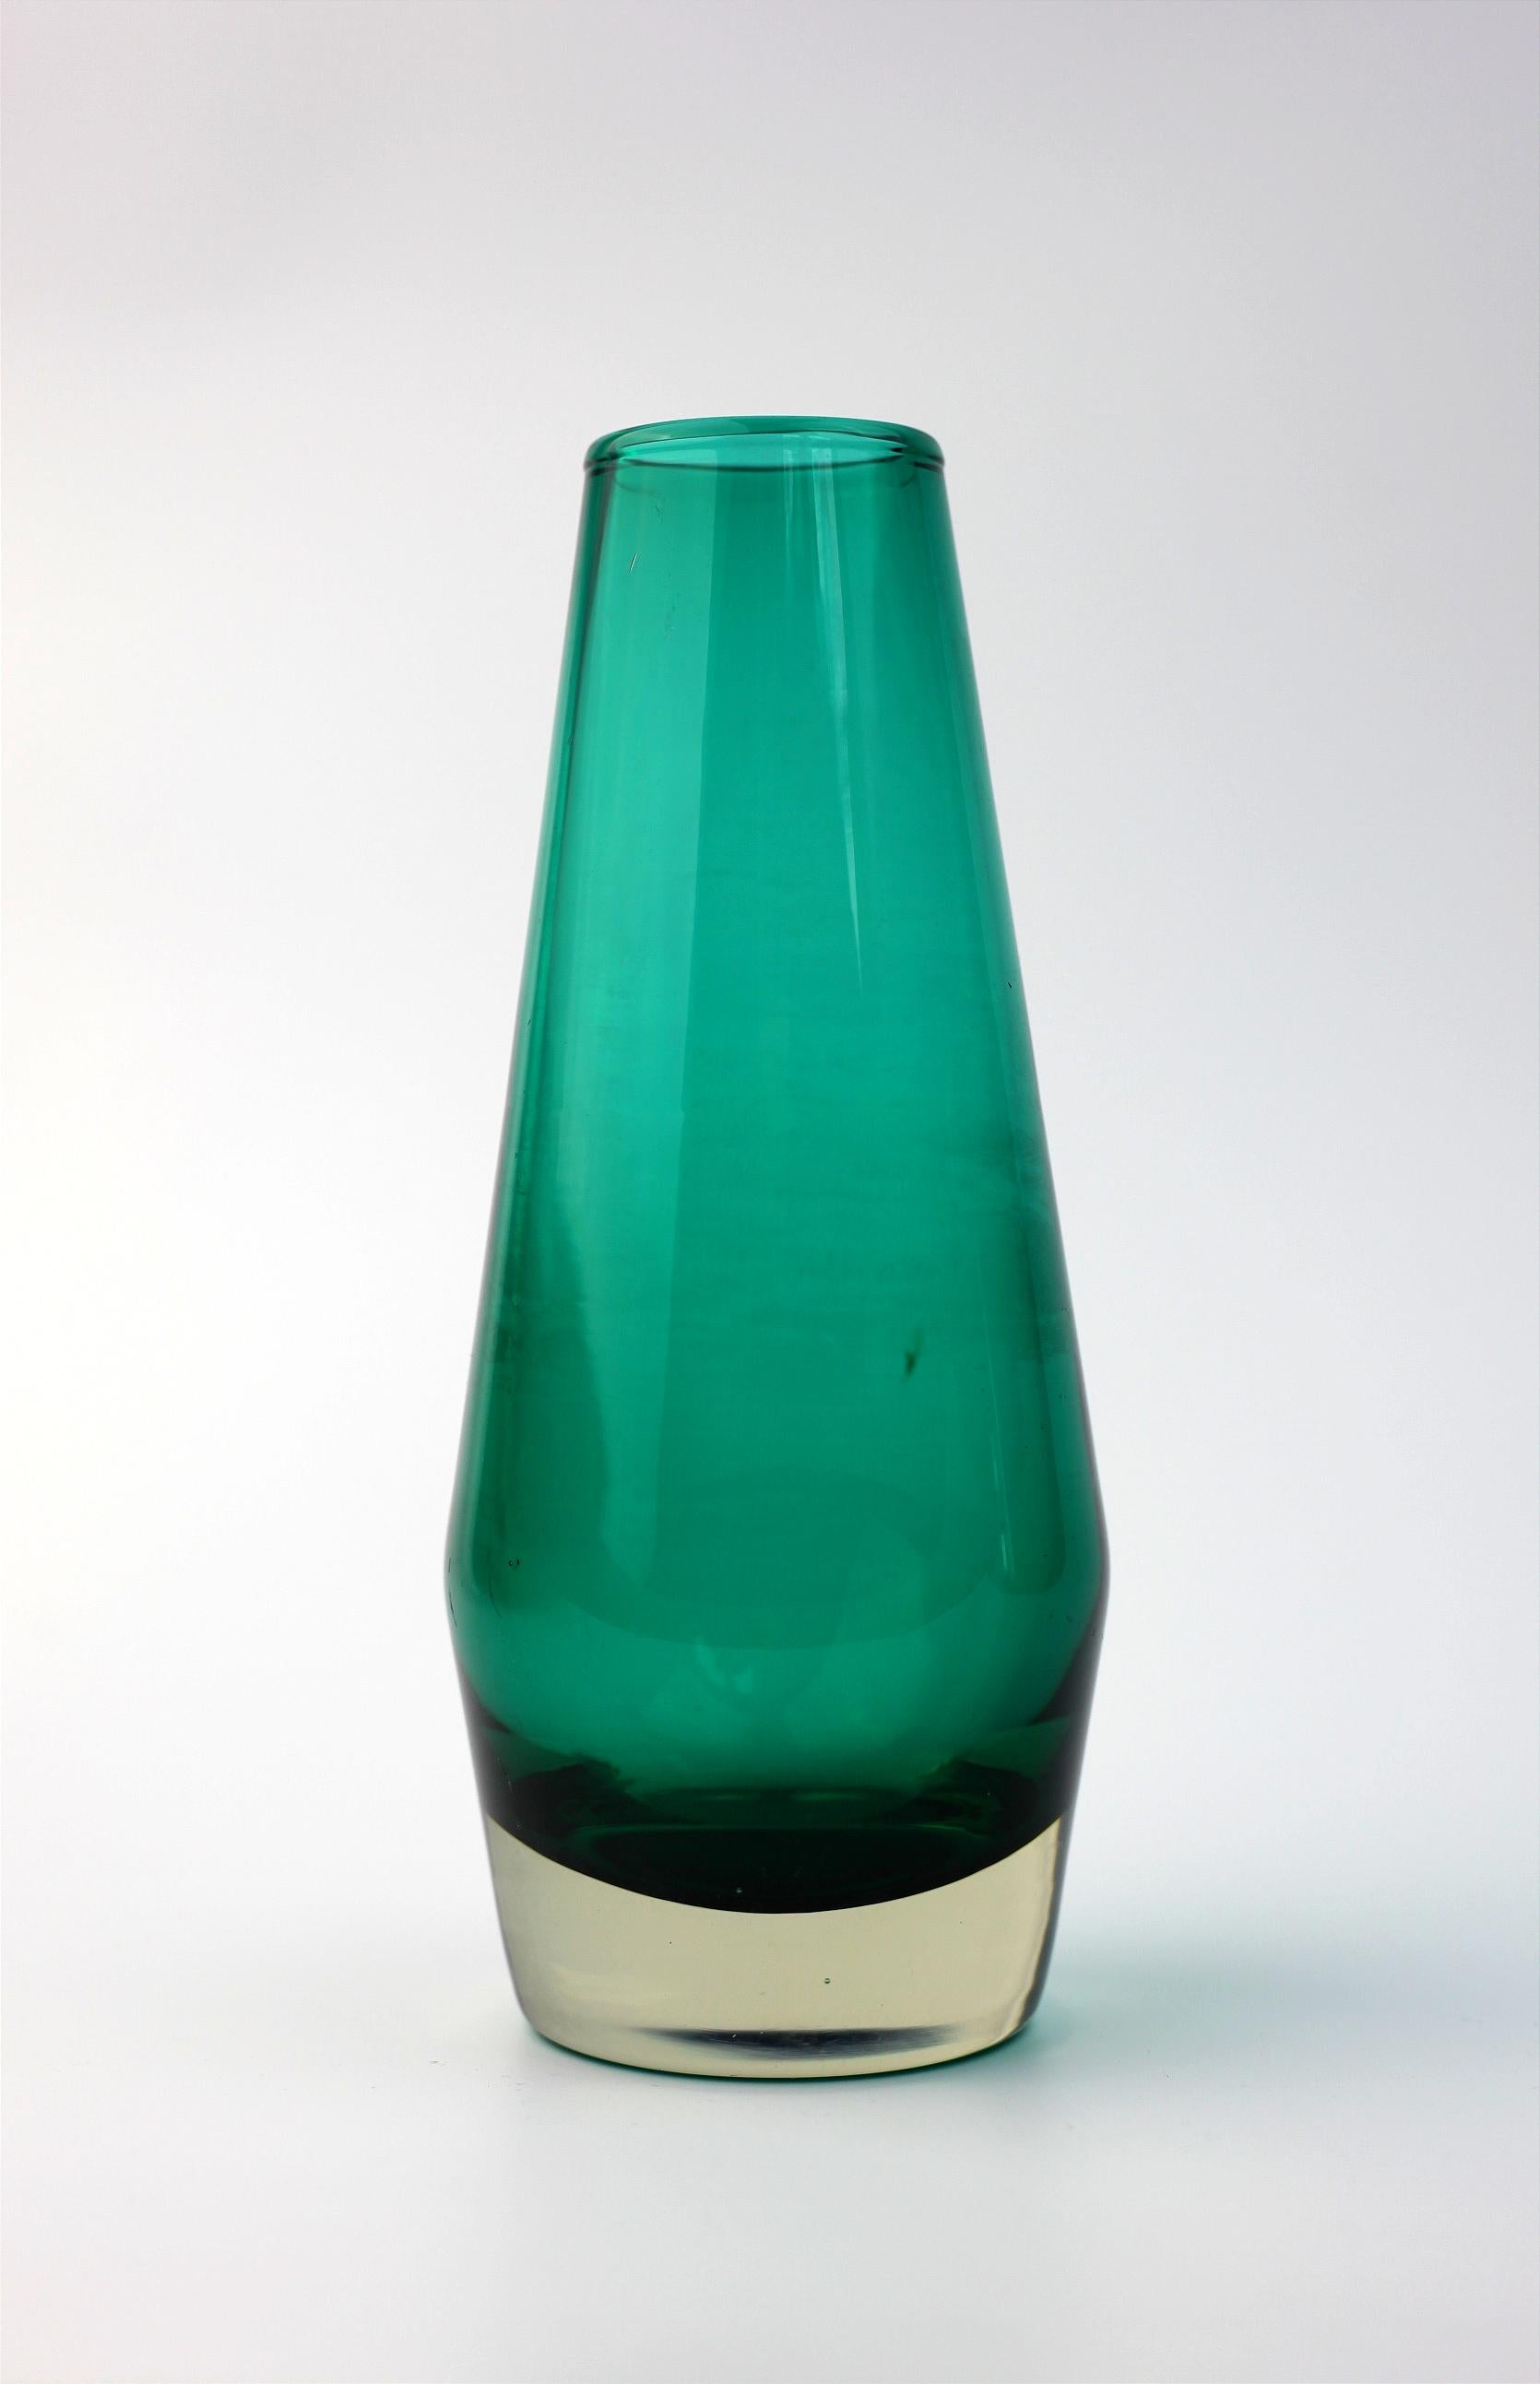 Nice Turquoise Glass vase by Tamara Aladin from Finland

It is around 16 cm tall 
and 7 cm wide.